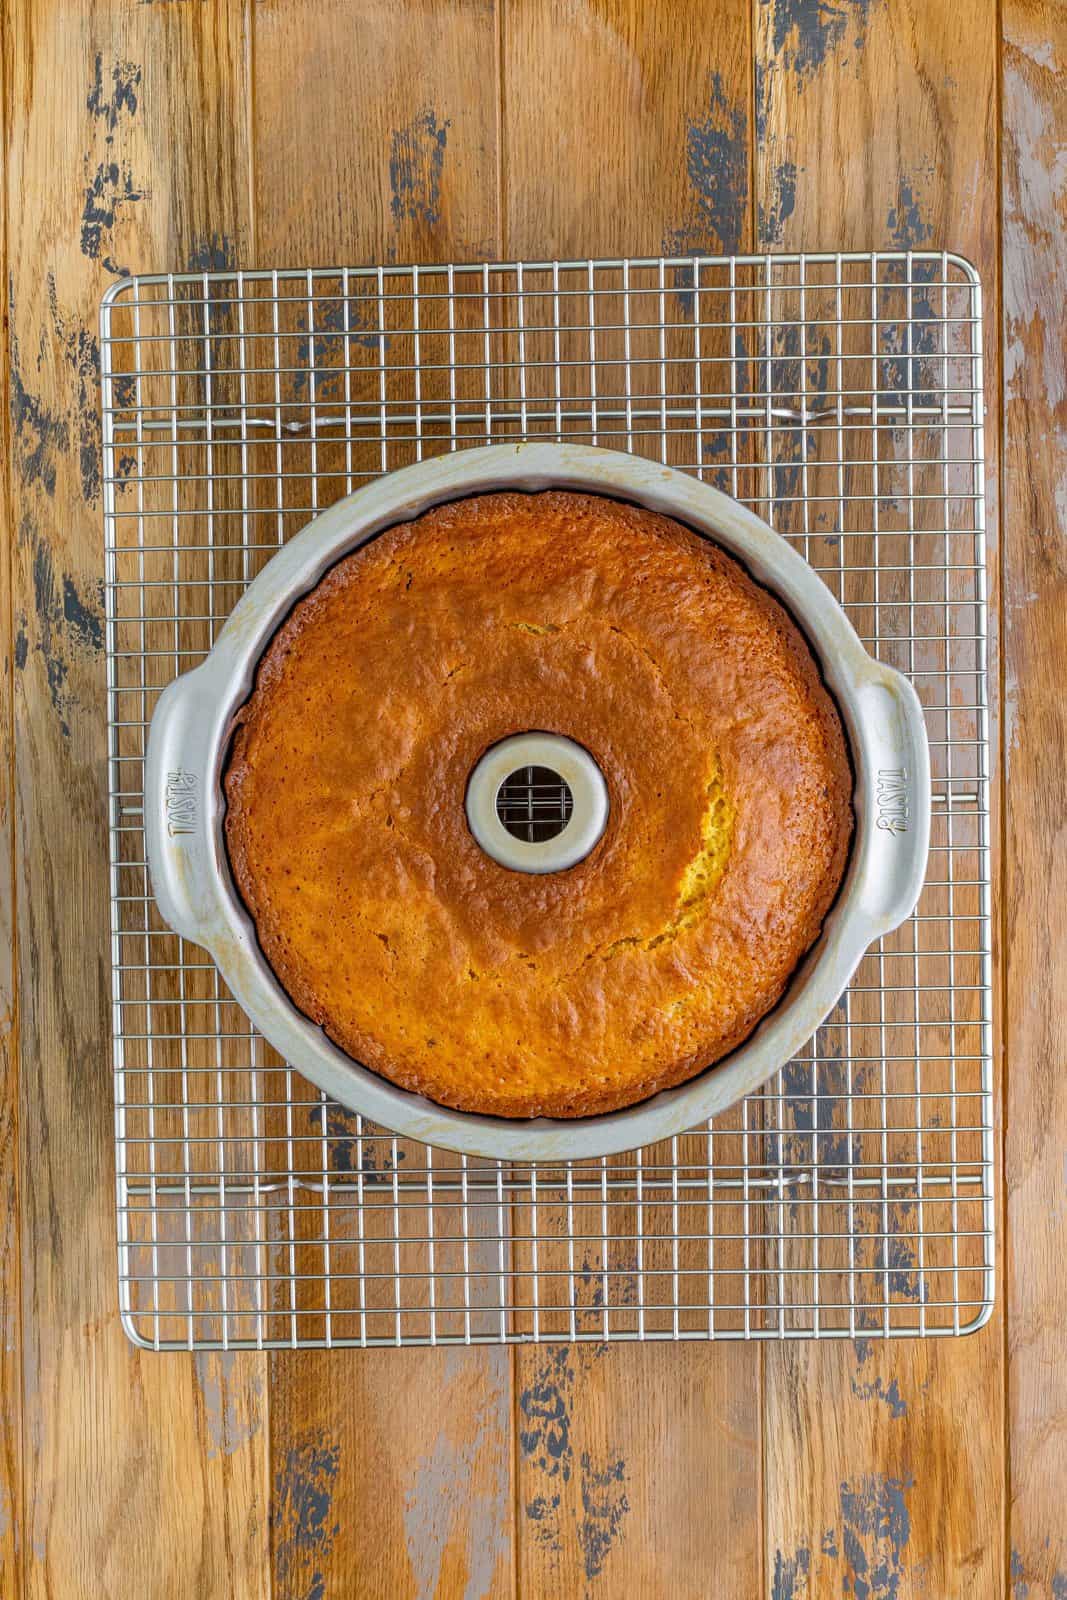 A fresh baked Sock It To Me Cake cooling in the bundt pan.